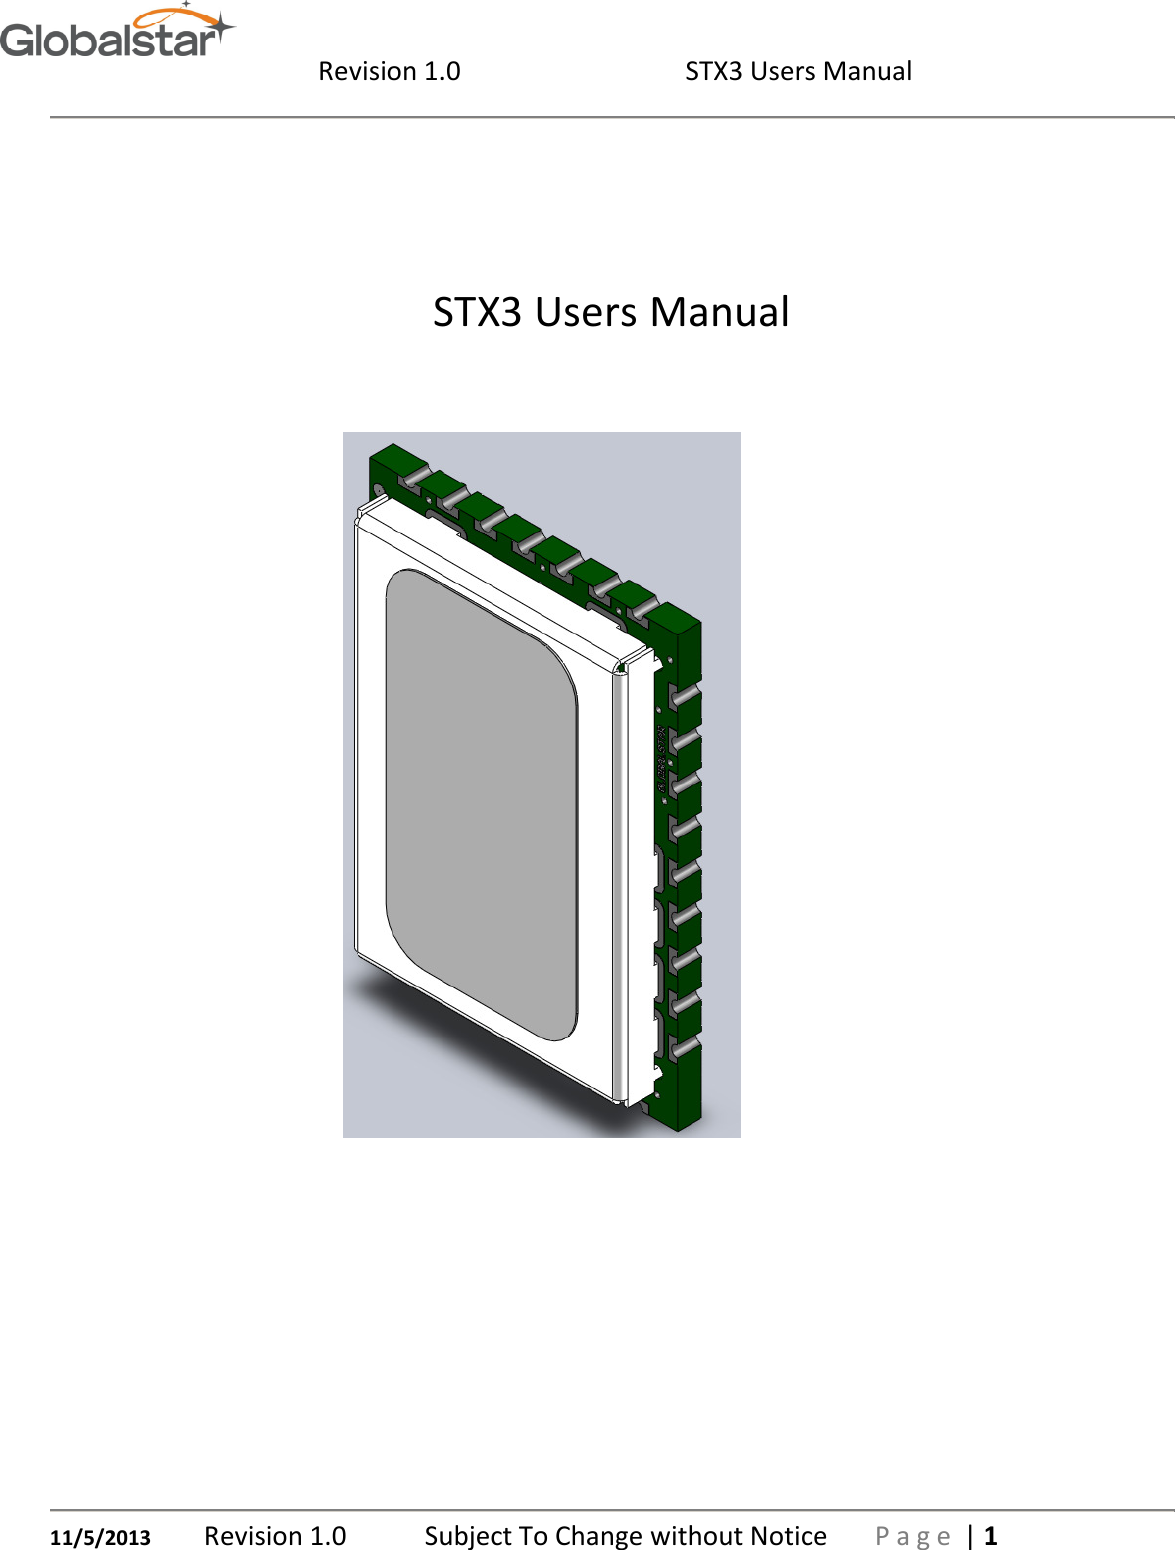  Revision 1.0  STX3 Users Manual   11/5/2013 Revision 1.0   Subject To Change without Notice  P a g e  | 1    STX3 Users Manual     